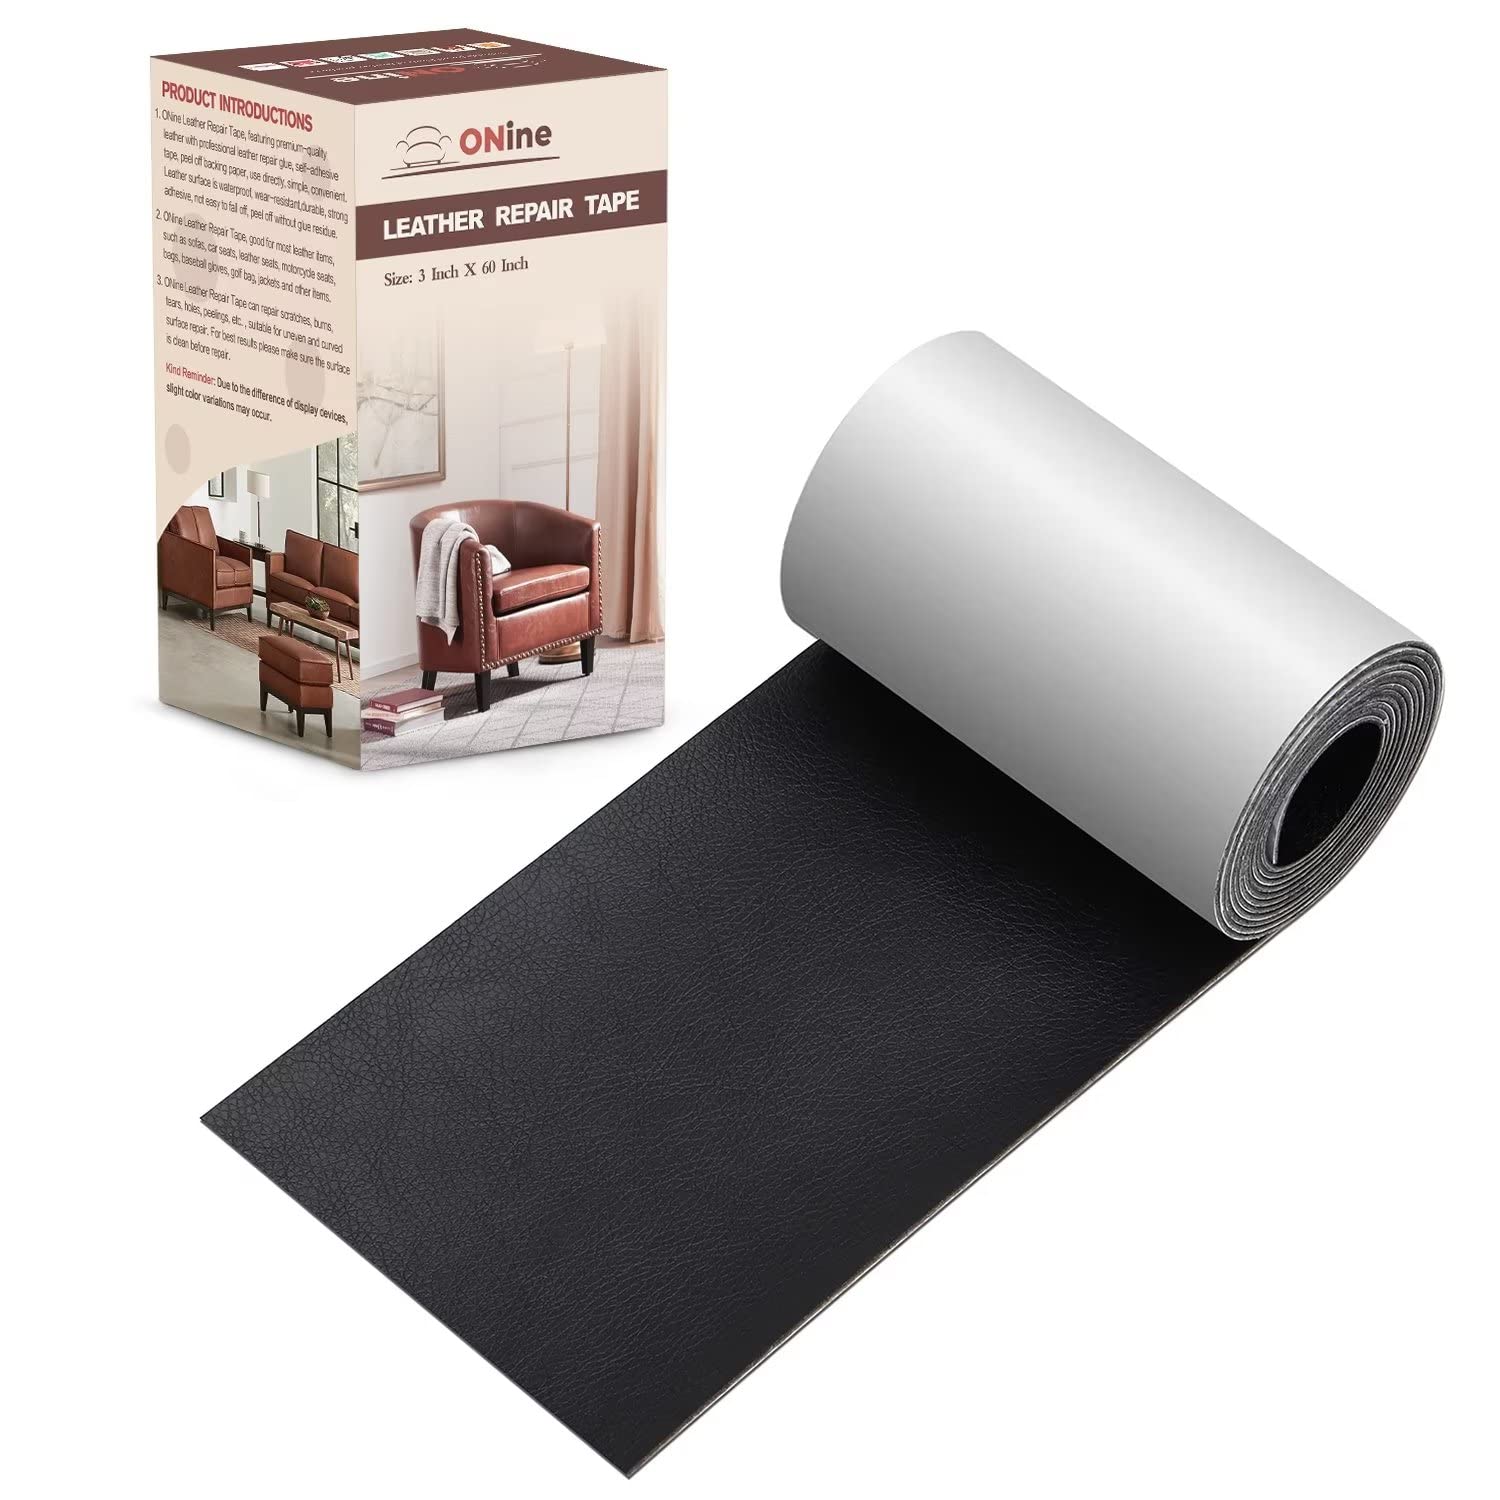 Sofa Leather Repair Patch Tape 15x60 Inch Large Self Adhesive Leather Sofa,  Car Seat, Leather Furniture, Vinyl Repair Patch Kit (15x60 Inch, Brownish